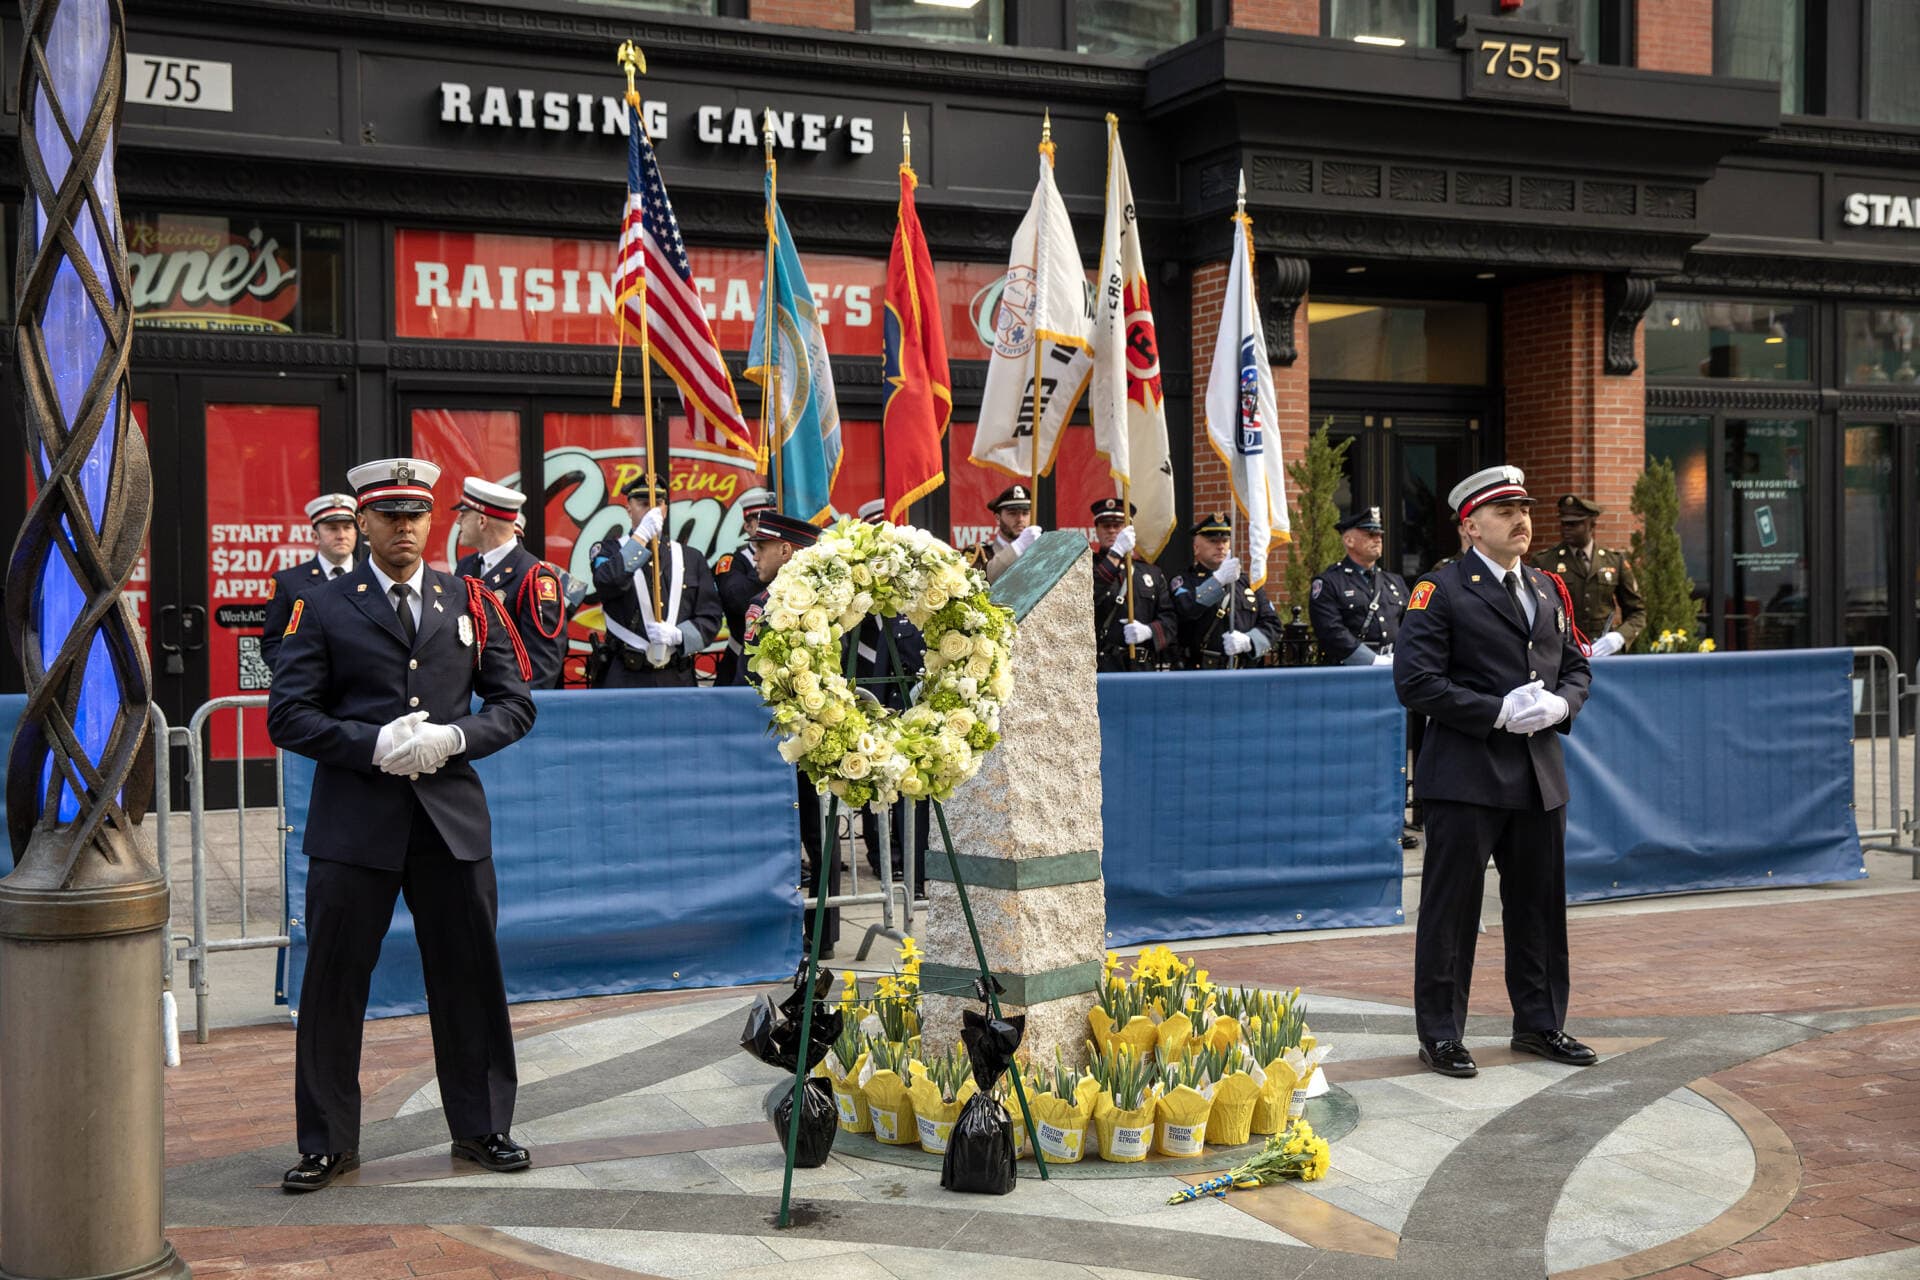 Ten years after the 2013 Boston Marathon, an honor guard stands in remembrance by the memorial at the site of the first bomb on Boylston Street. (Robin Lubbock/WBUR)